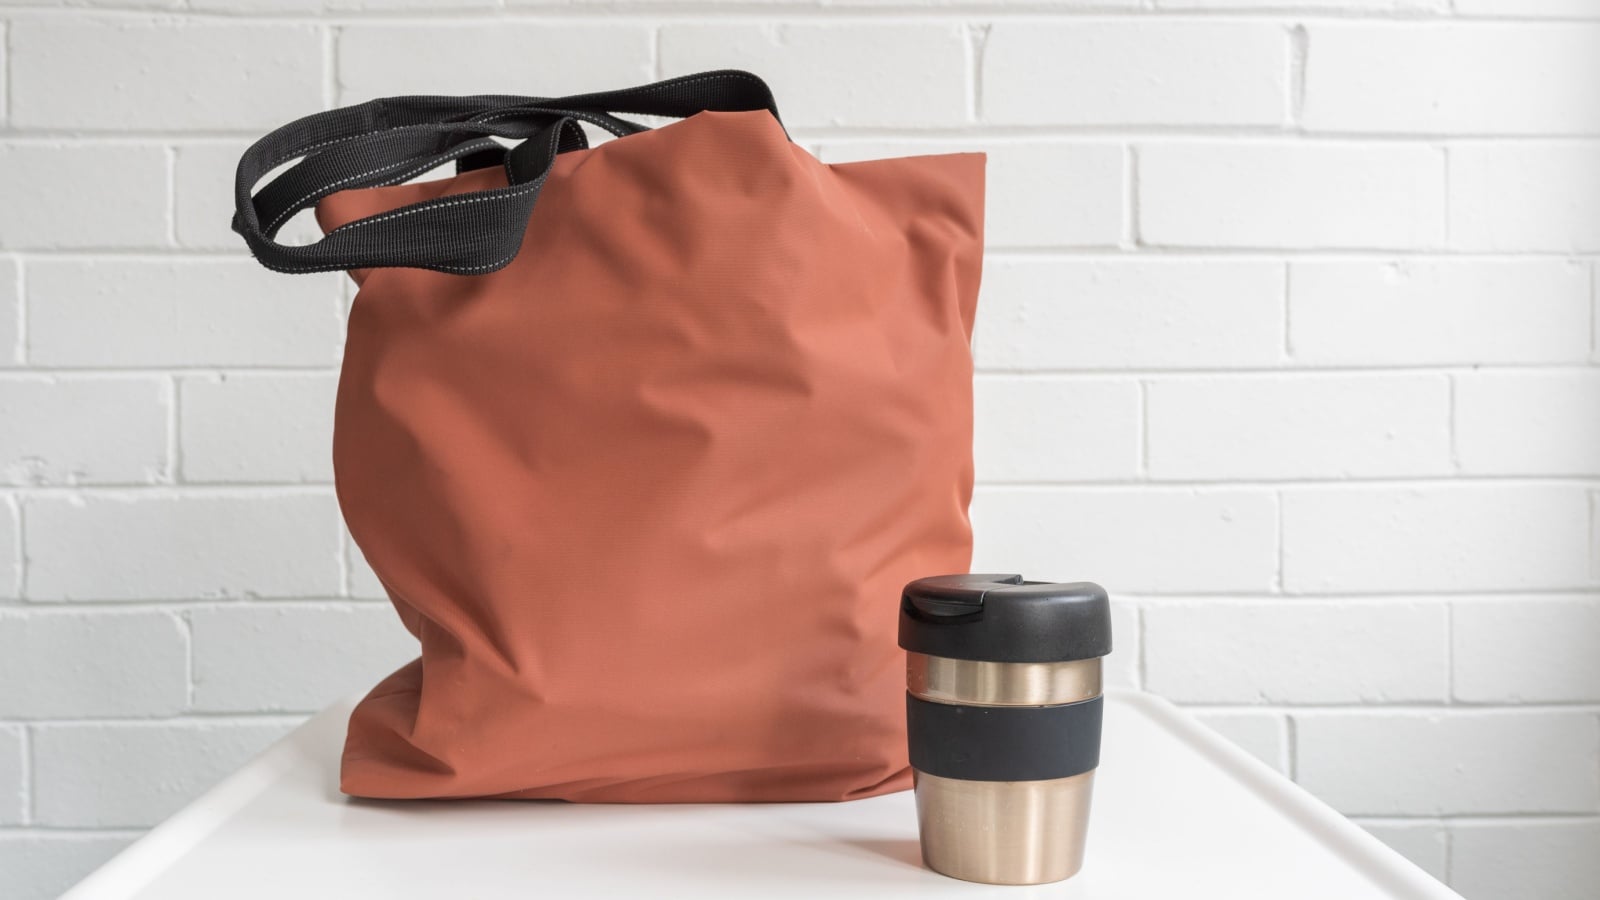 <p class="whitespace-pre-wrap break-words">A reusable shopping bag is a simple yet incredibly useful item to pack for your travels. Not only is it environmentally friendly, but it also comes in handy for a variety of situations.</p><p class="whitespace-pre-wrap break-words">Use it to carry snacks and water bottles during day trips, to store dirty laundry, or to transport souvenirs and purchases back to your accommodations. Look for a lightweight, foldable bag that can be easily tucked into your purse or backpack when not in use.</p>